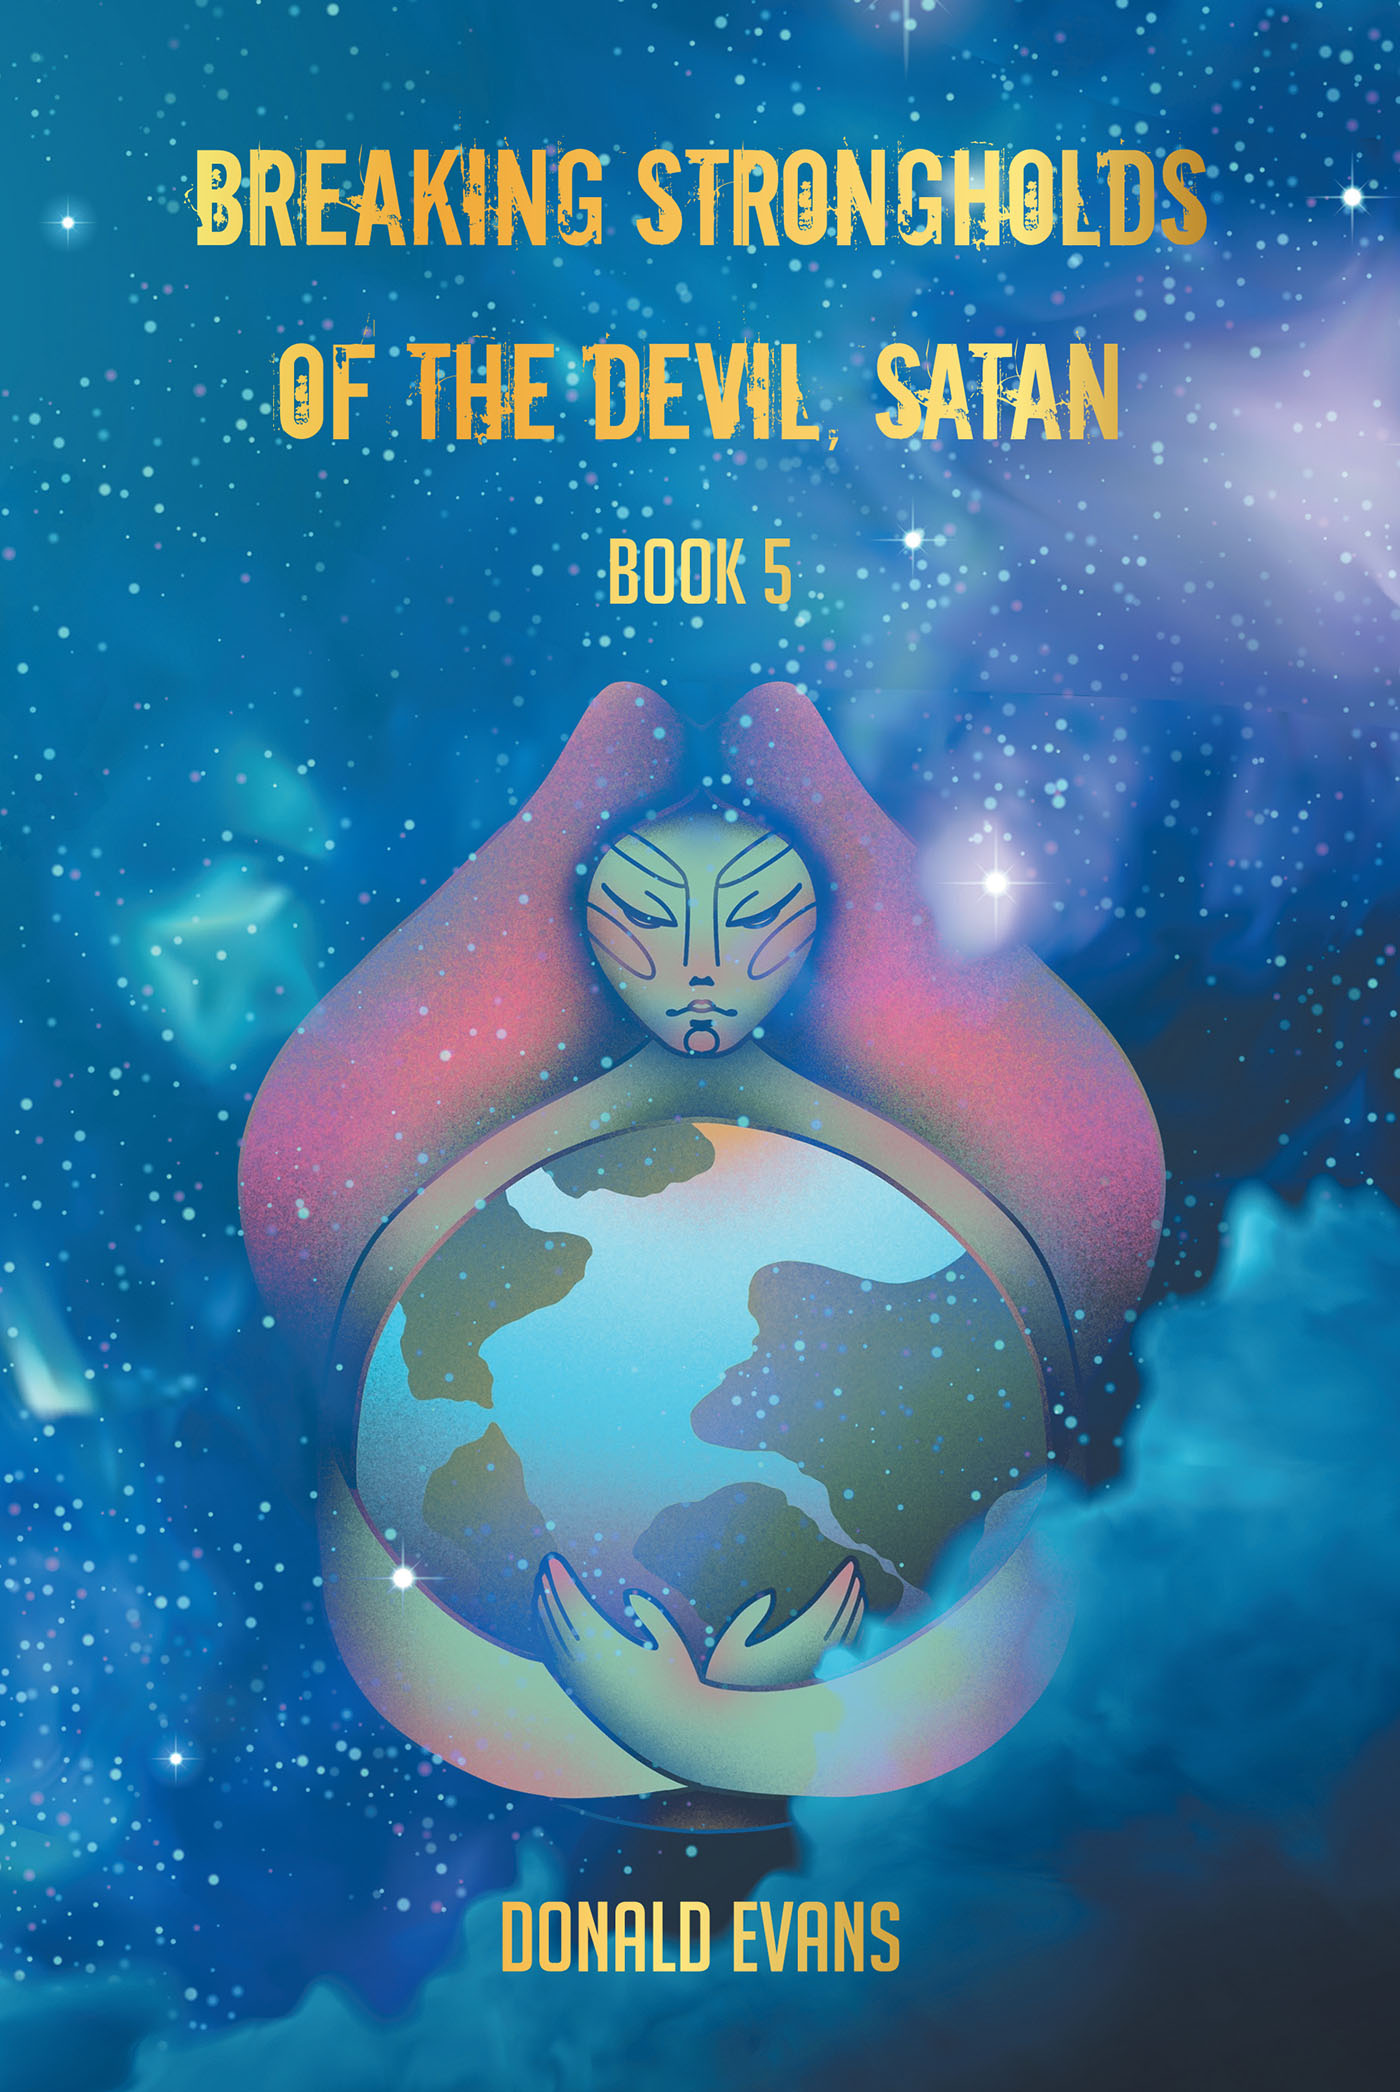 Donald Evans’s Newly Released "Breaking Strongholds of the Devil, Satan: Book 5" is an Urgent Message for All Regarding the Unseen Forces in the Modern World